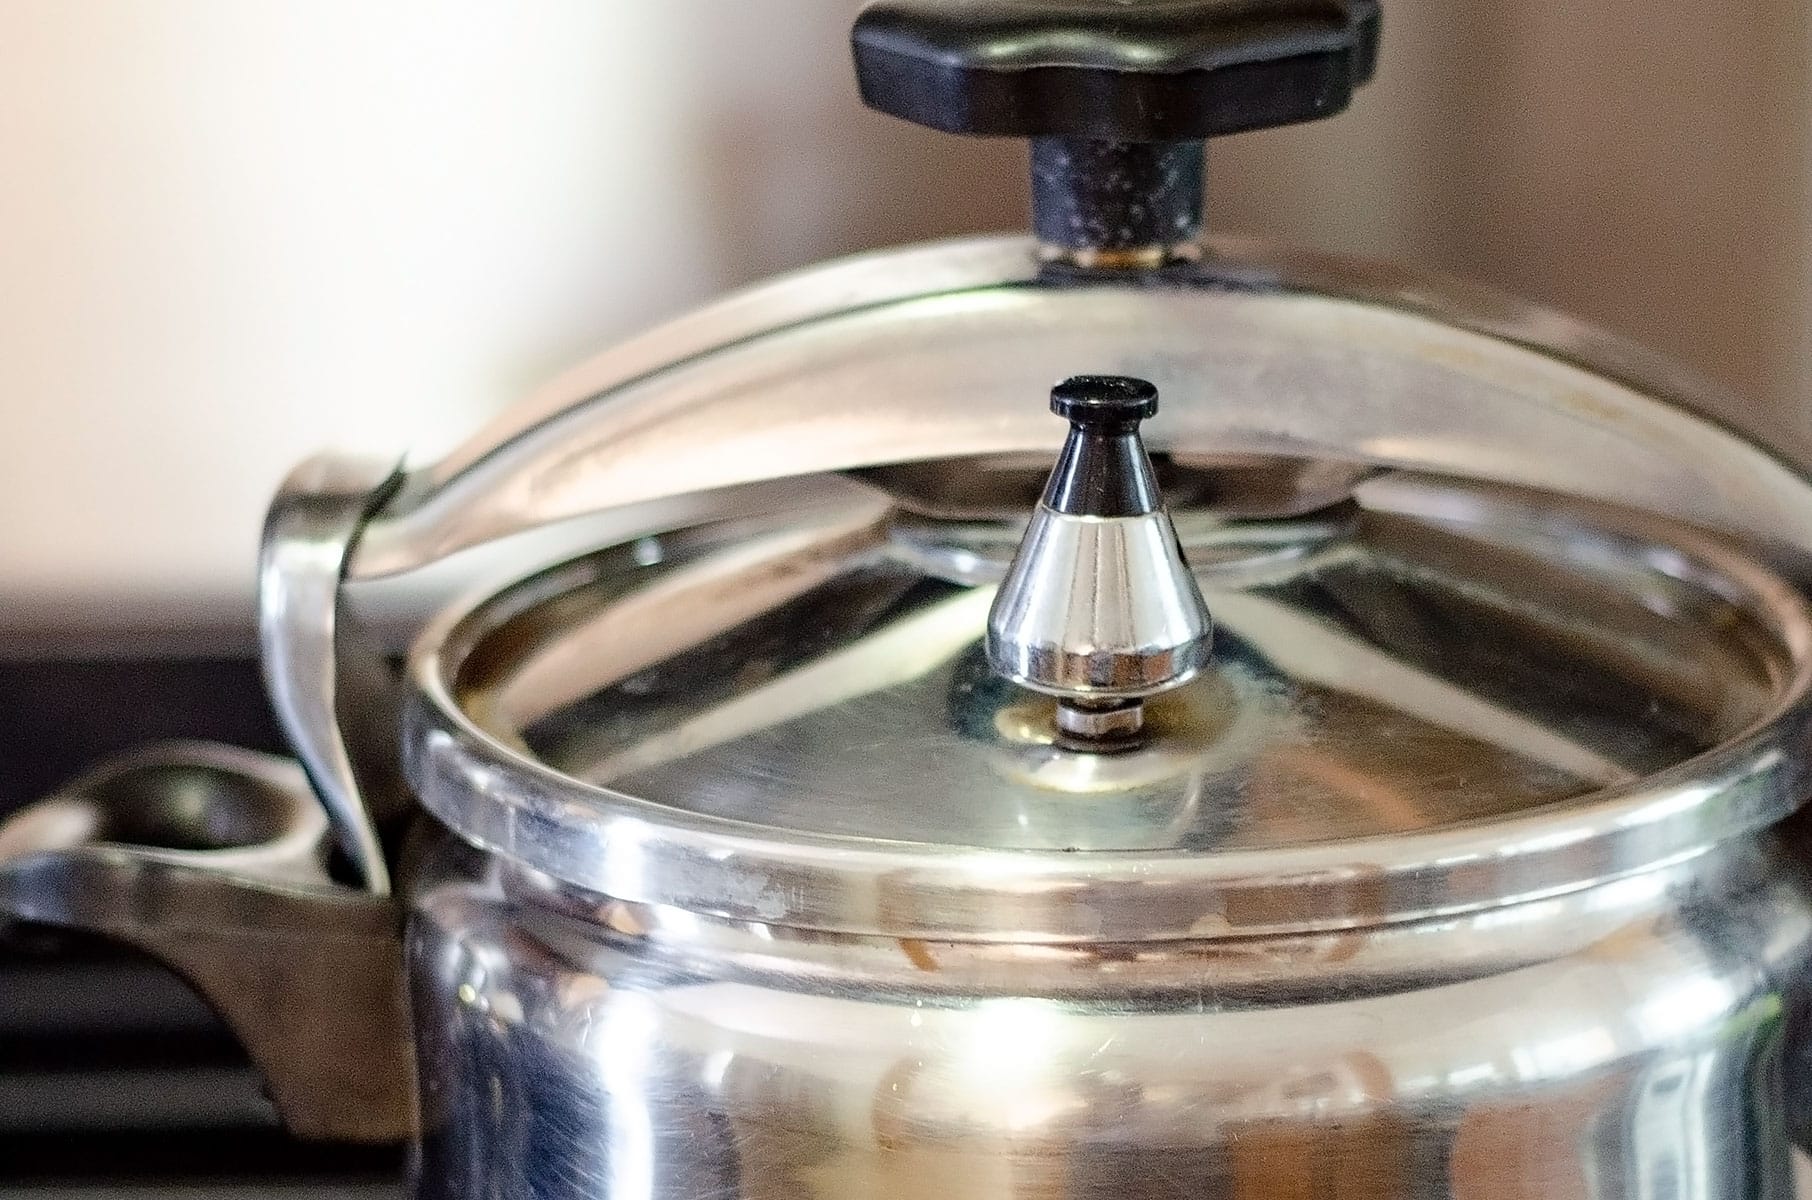 Boiling in pressure cooker